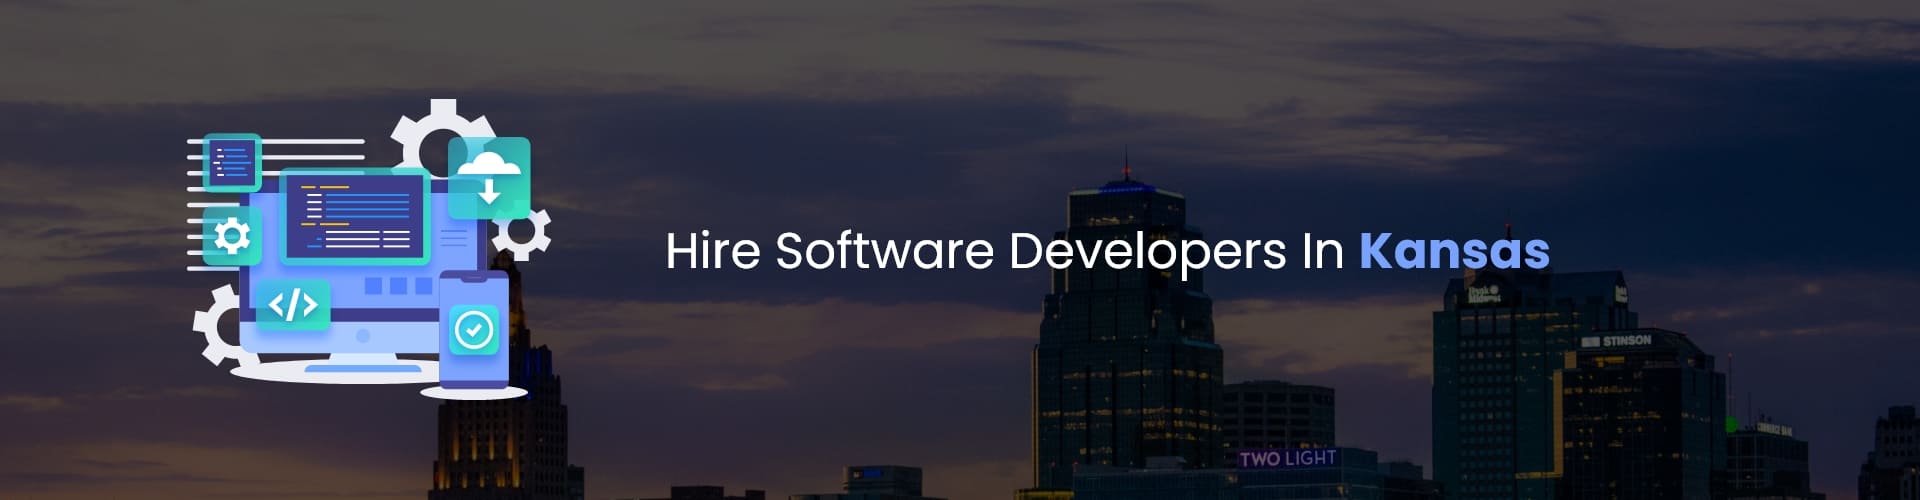 hire hire software developers in kansas